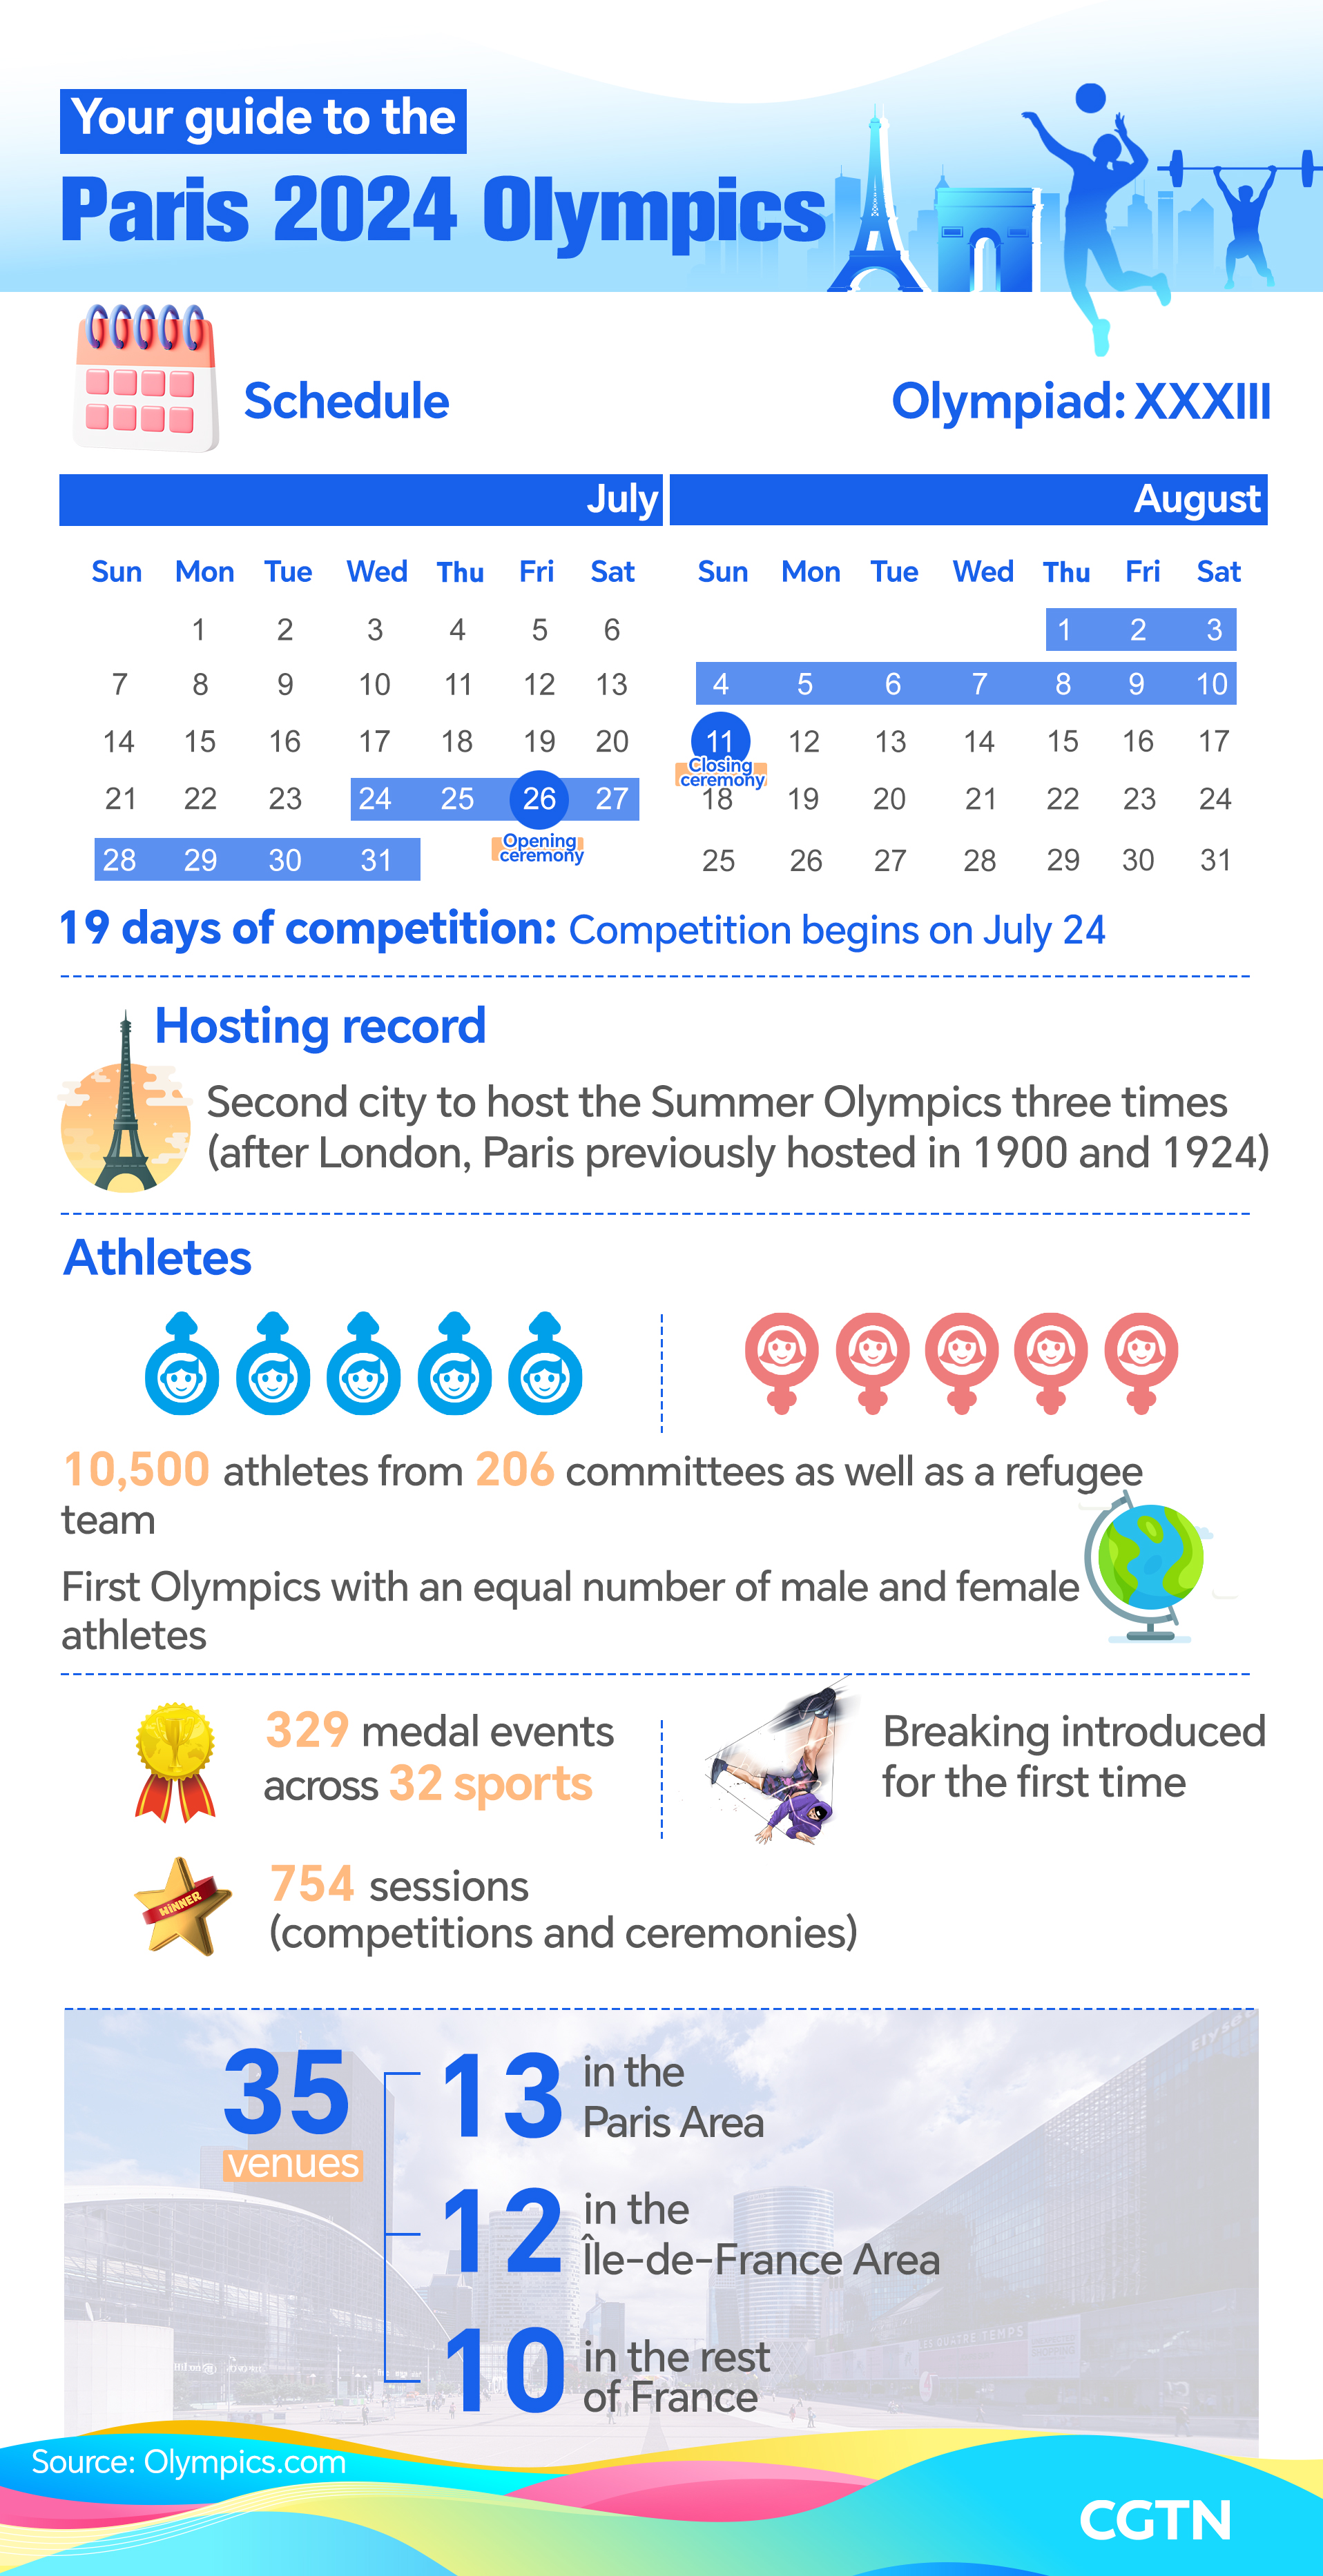 Chart of the Day: Your guide to the Paris 2024 Olympics